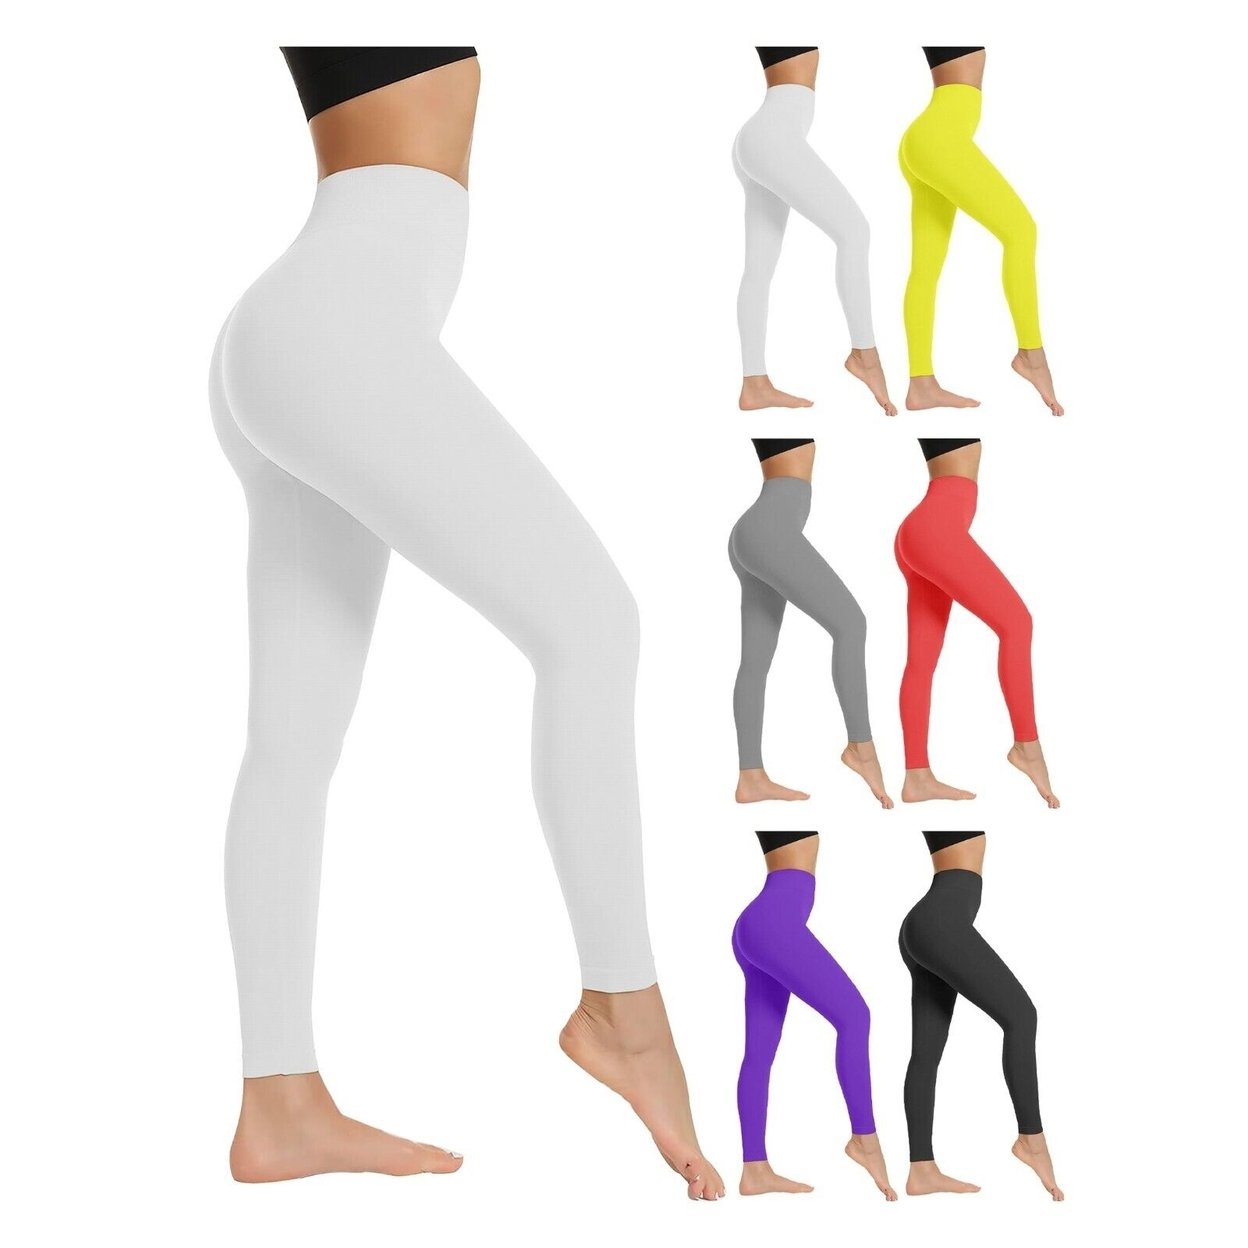 2-Pack: Women's High Waist Super Soft Active Athlete Stretch Yoga Cozy Leggings - Yellow & Red, Large